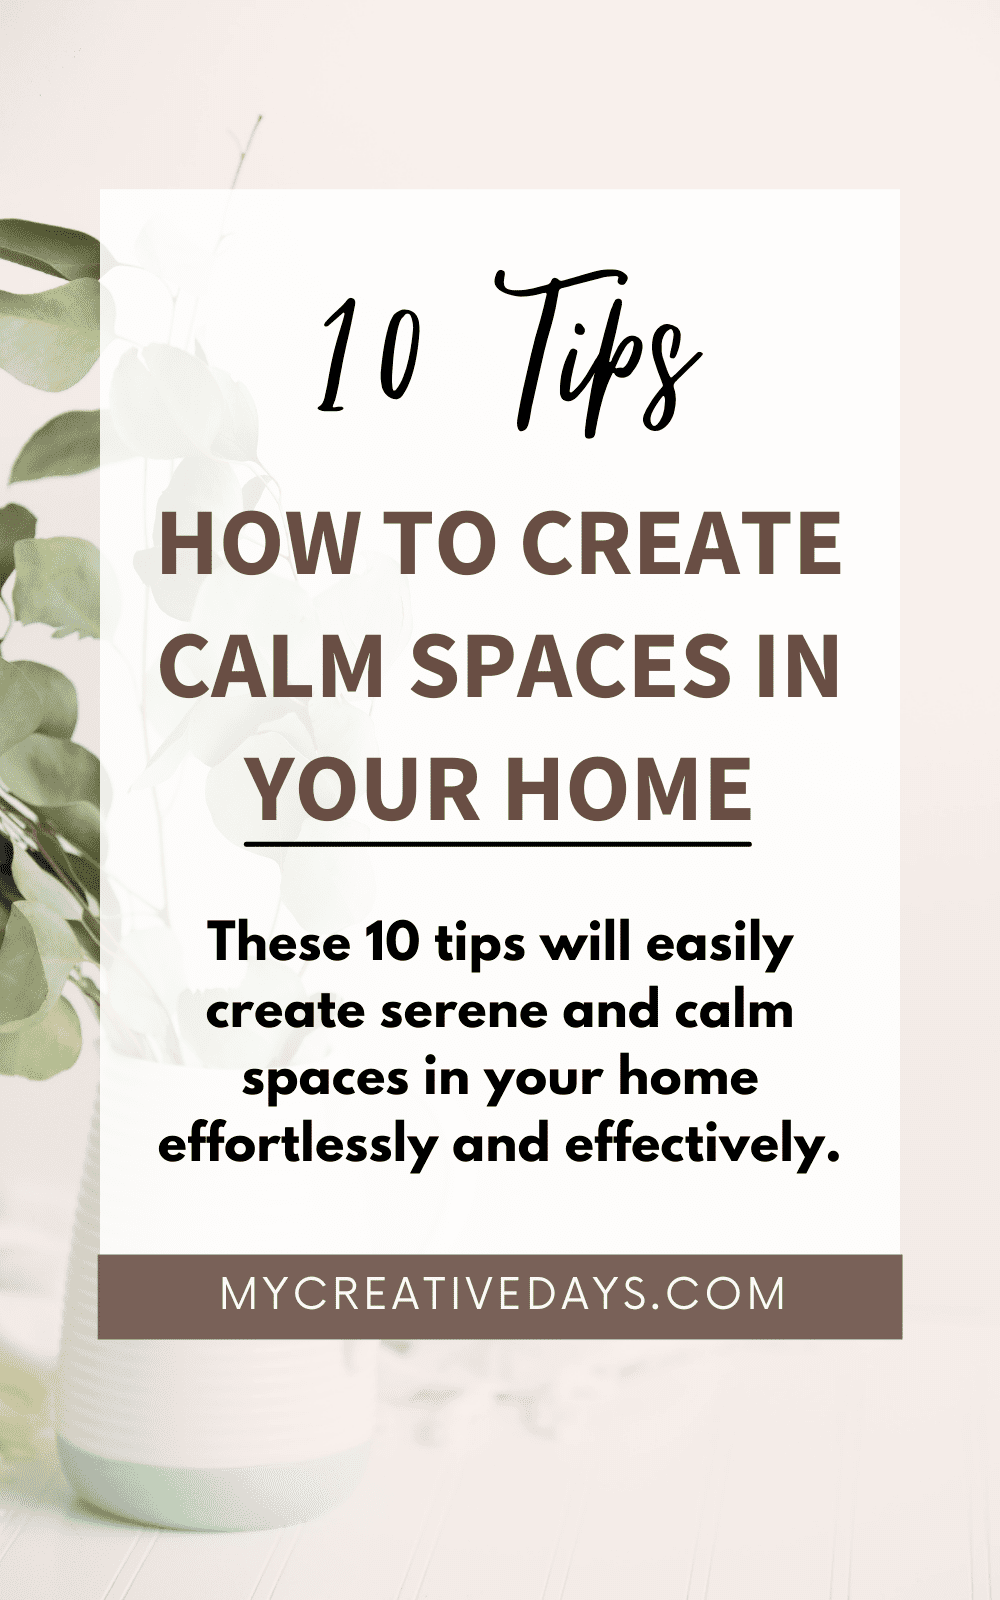 How To Create Calm Spaces In Your Home. These 10 tips will create serene and calm spaces in your home effortlessly and effectively.